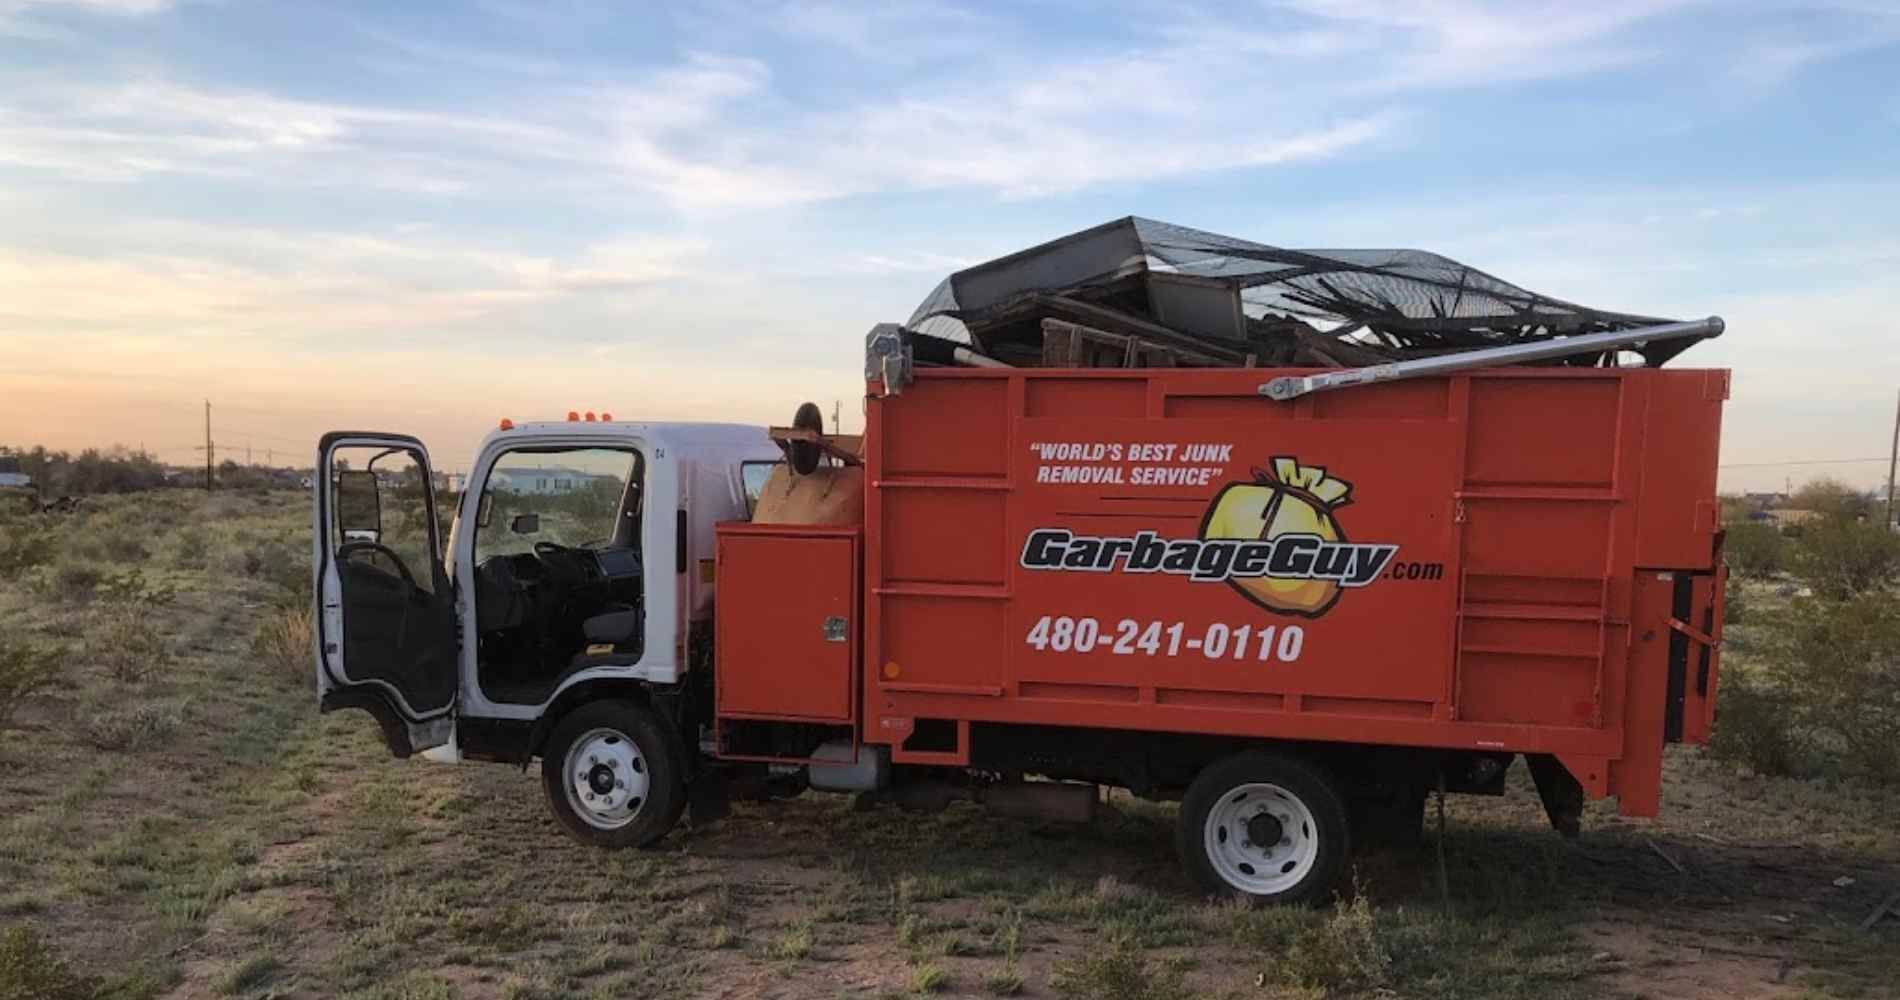 #1 for Junk Removal in Tolleson, AZ with Over 1200 5-Star Reviews!